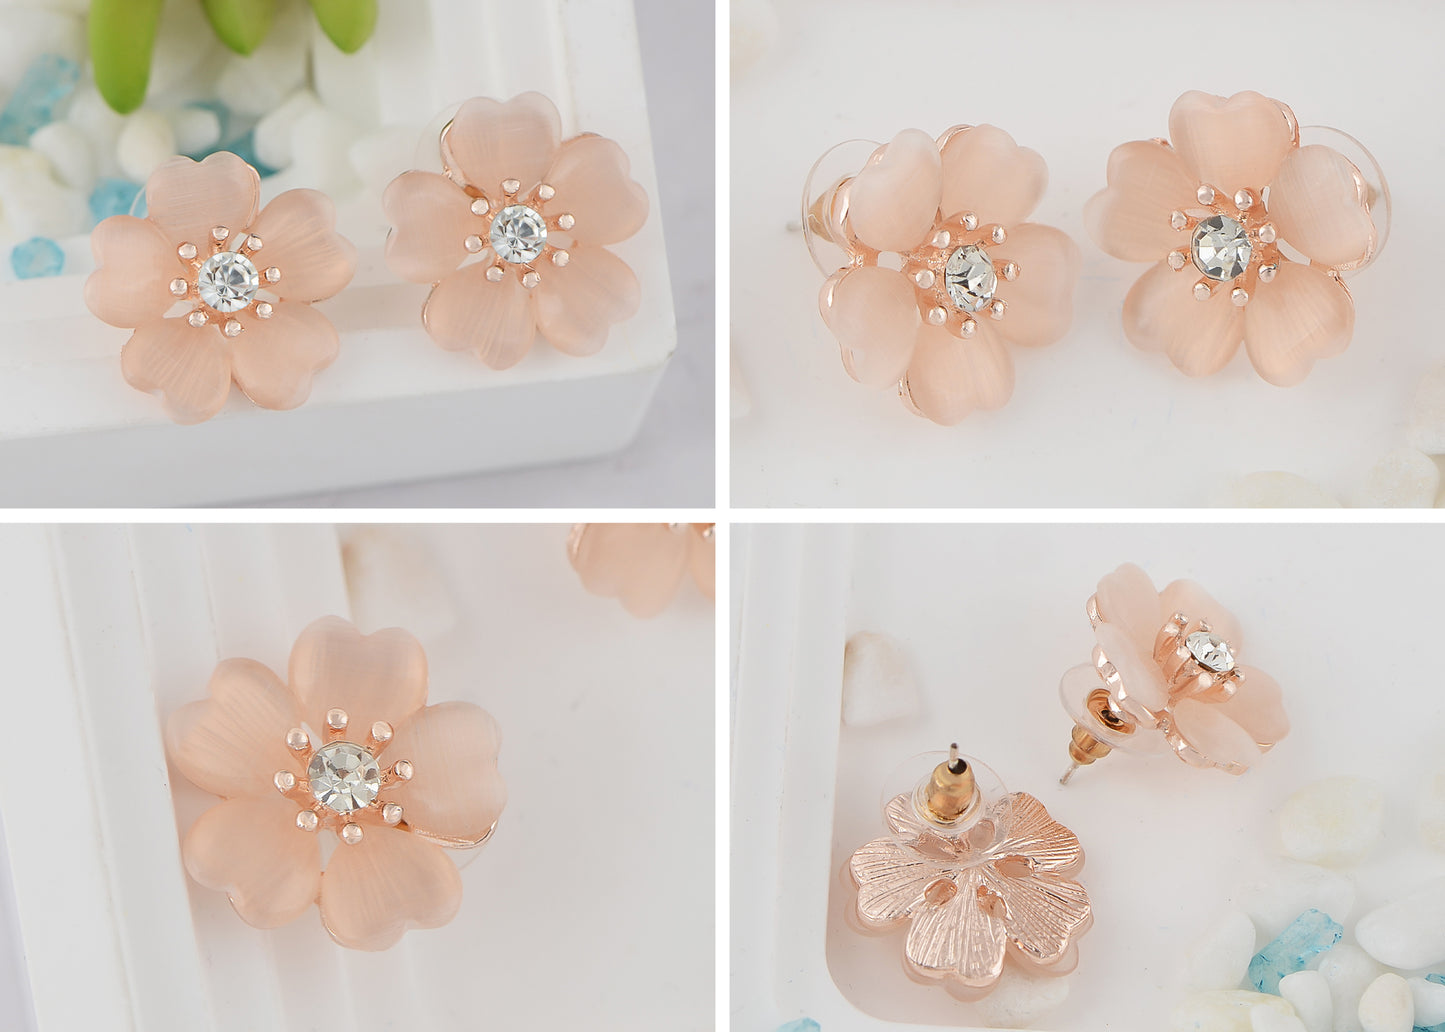 Alilang Silver Shiny Sparkly Crystal Pink Flower Accessories Girls Stud Earrings